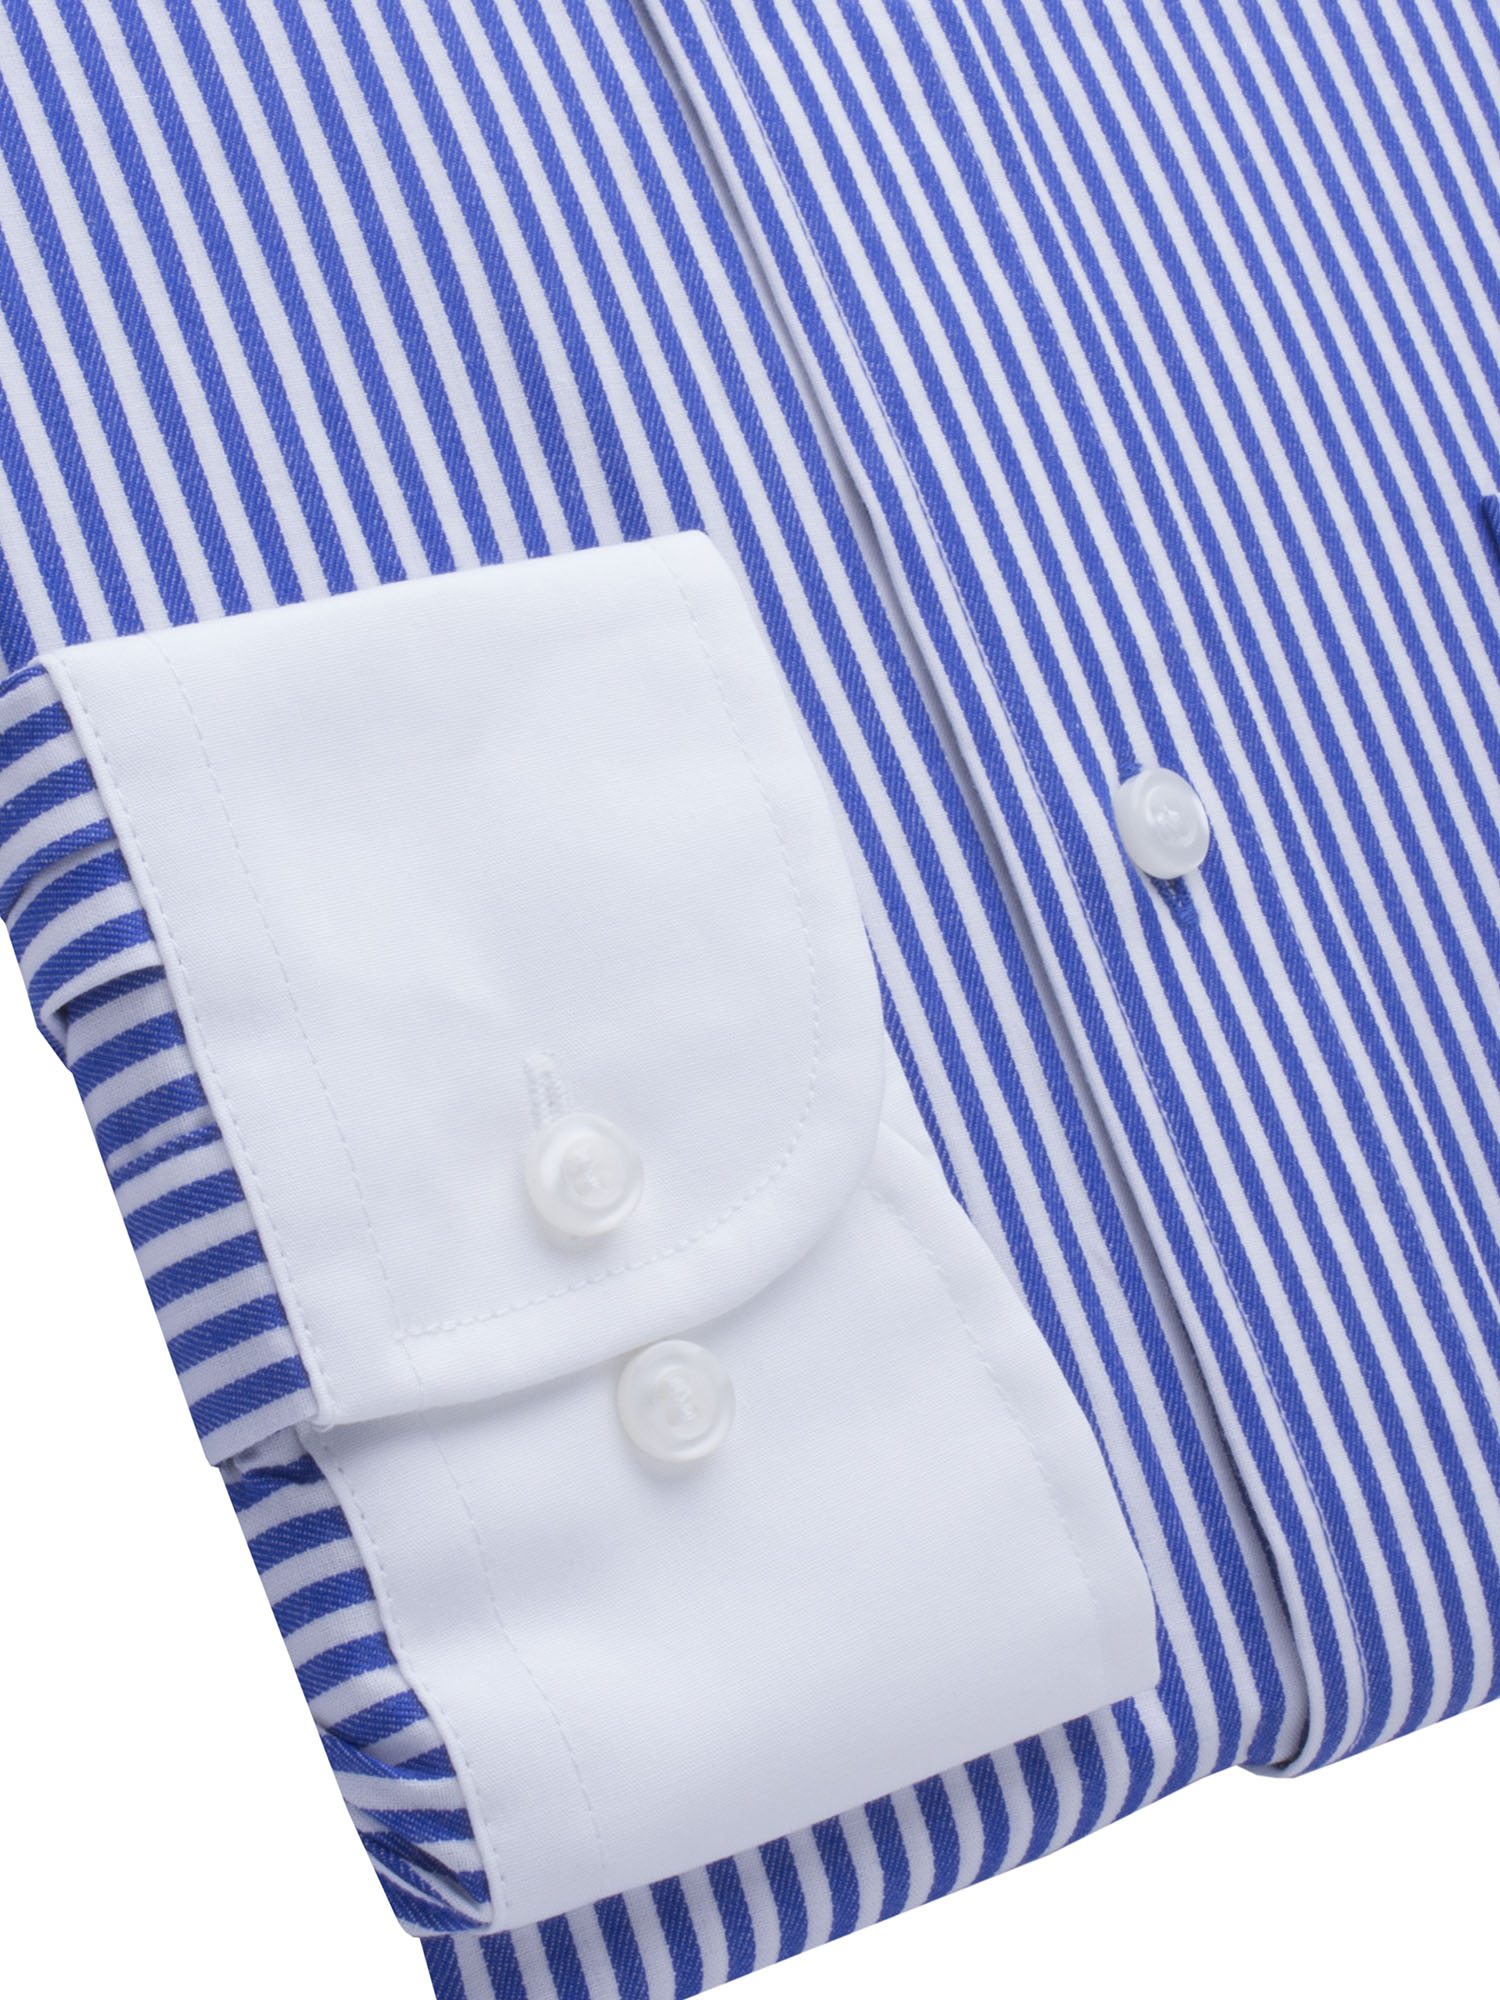 MENS BLUE AND WHITE STRIPE COTTON SHIRT WITH WHITE COLLAR AND CUFF ...